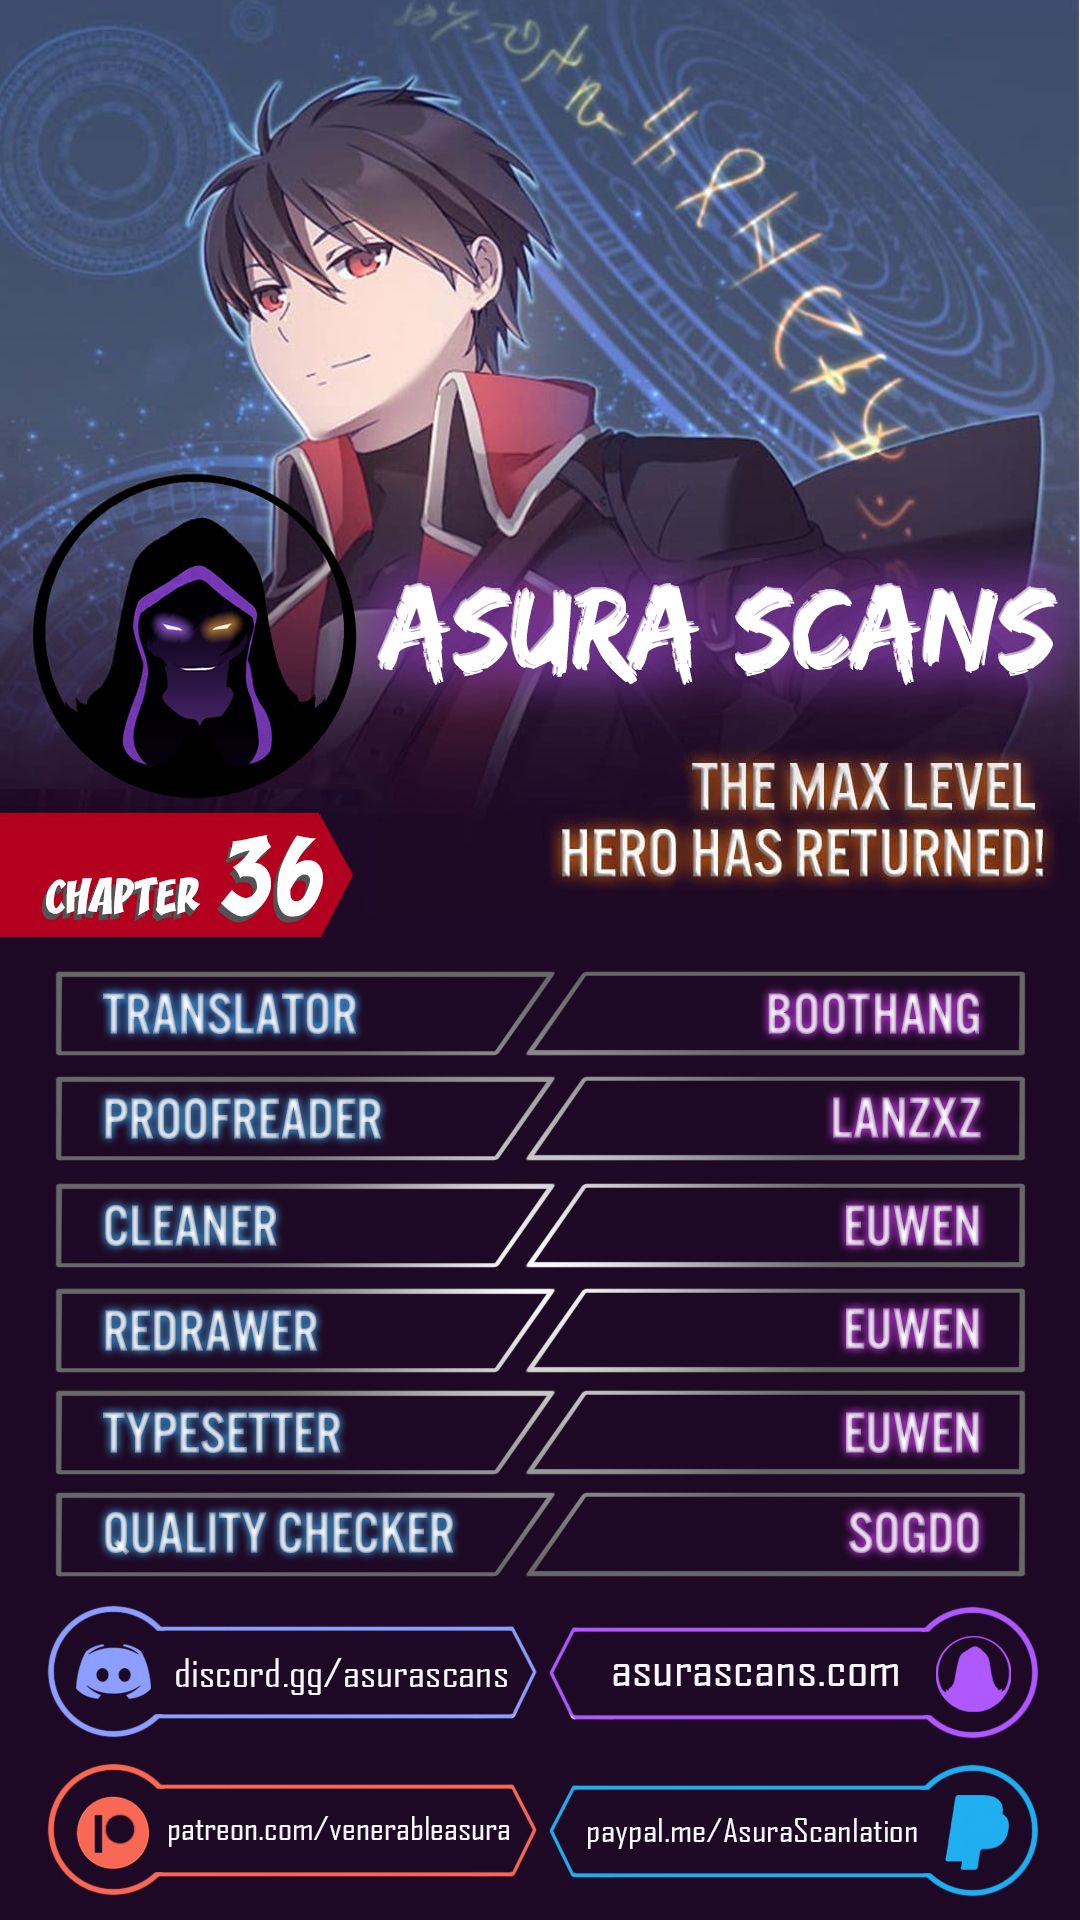 The Max Level Hero has Returned! chapter 36